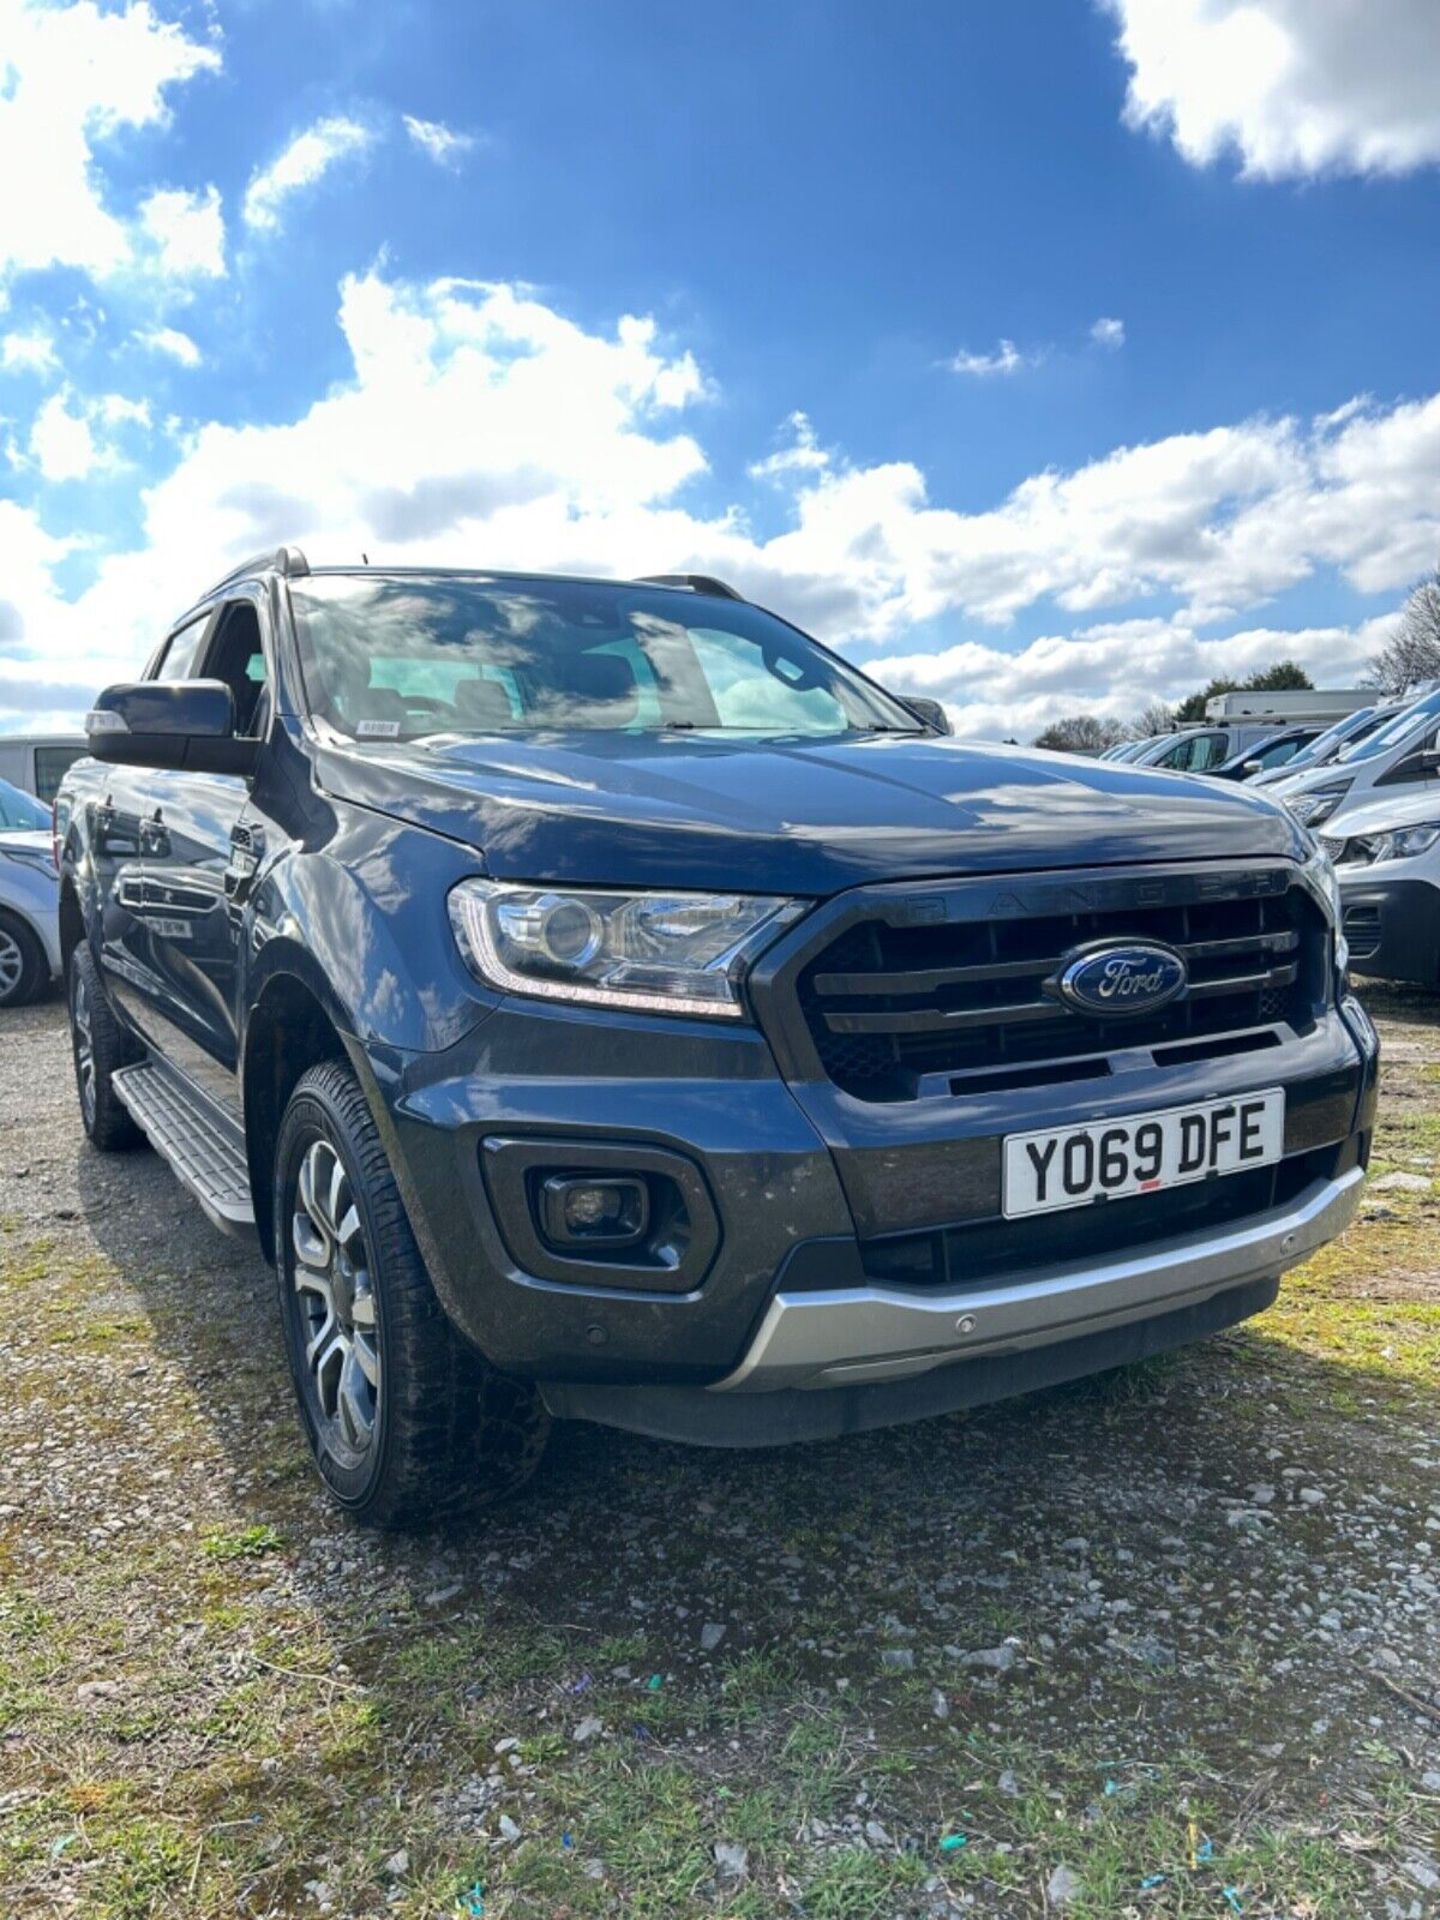 2020 FORD RANGER WILDTRAK 3.2 AUTOMATIC DOUBLE CAB PICKUP TRUCK 4WD EURO 6 *RESERVE JUST REDUCED*.